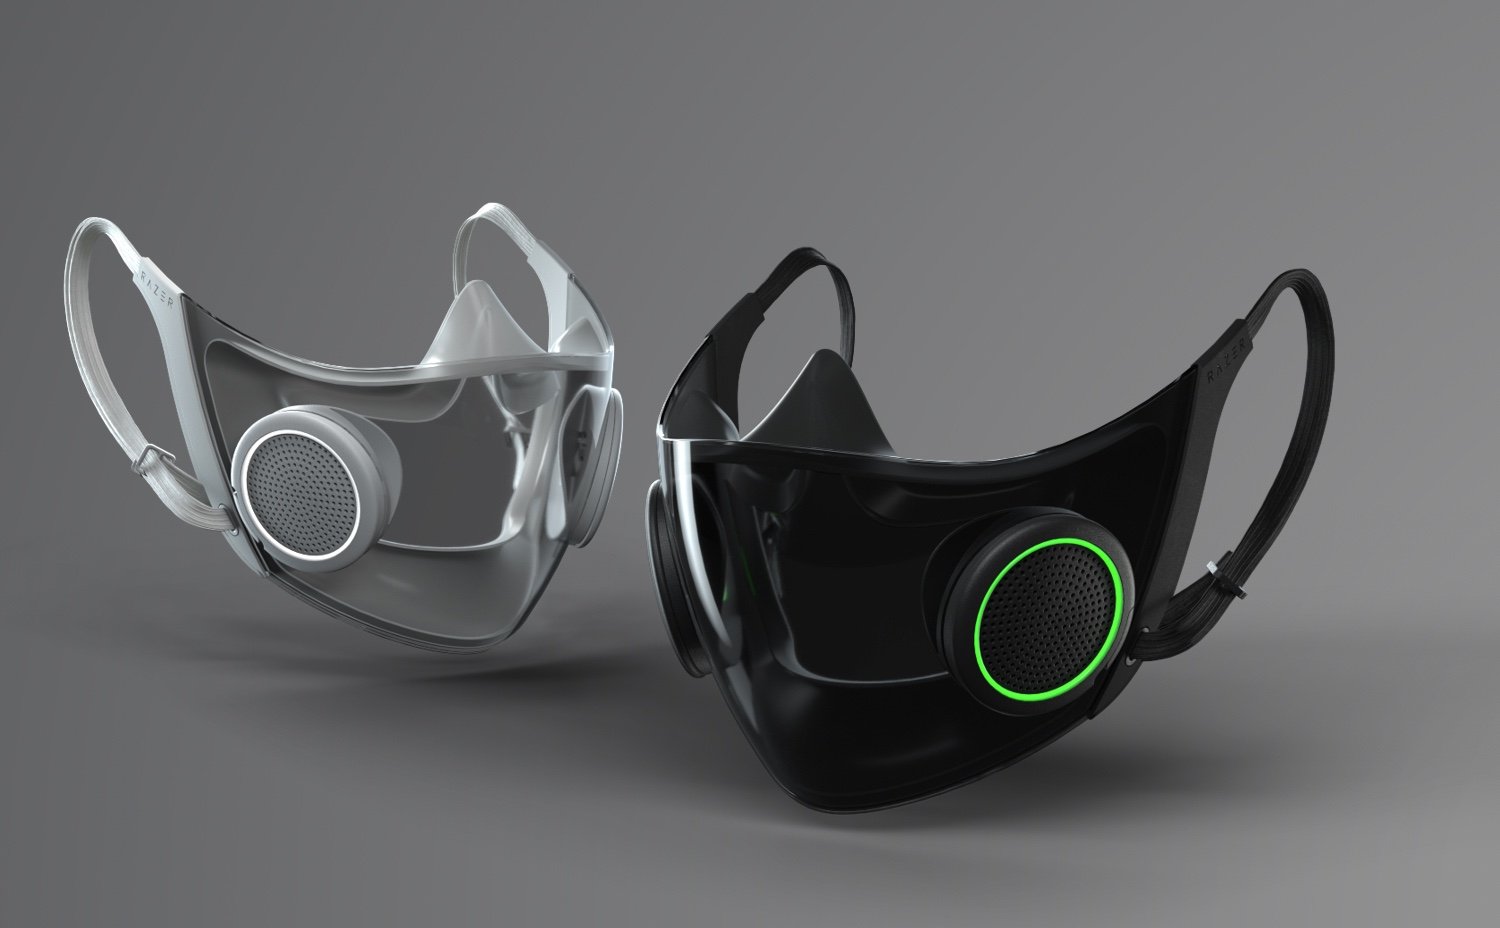 Razer’s high-tech face mask filters air and amplifies your voice, Bane-style